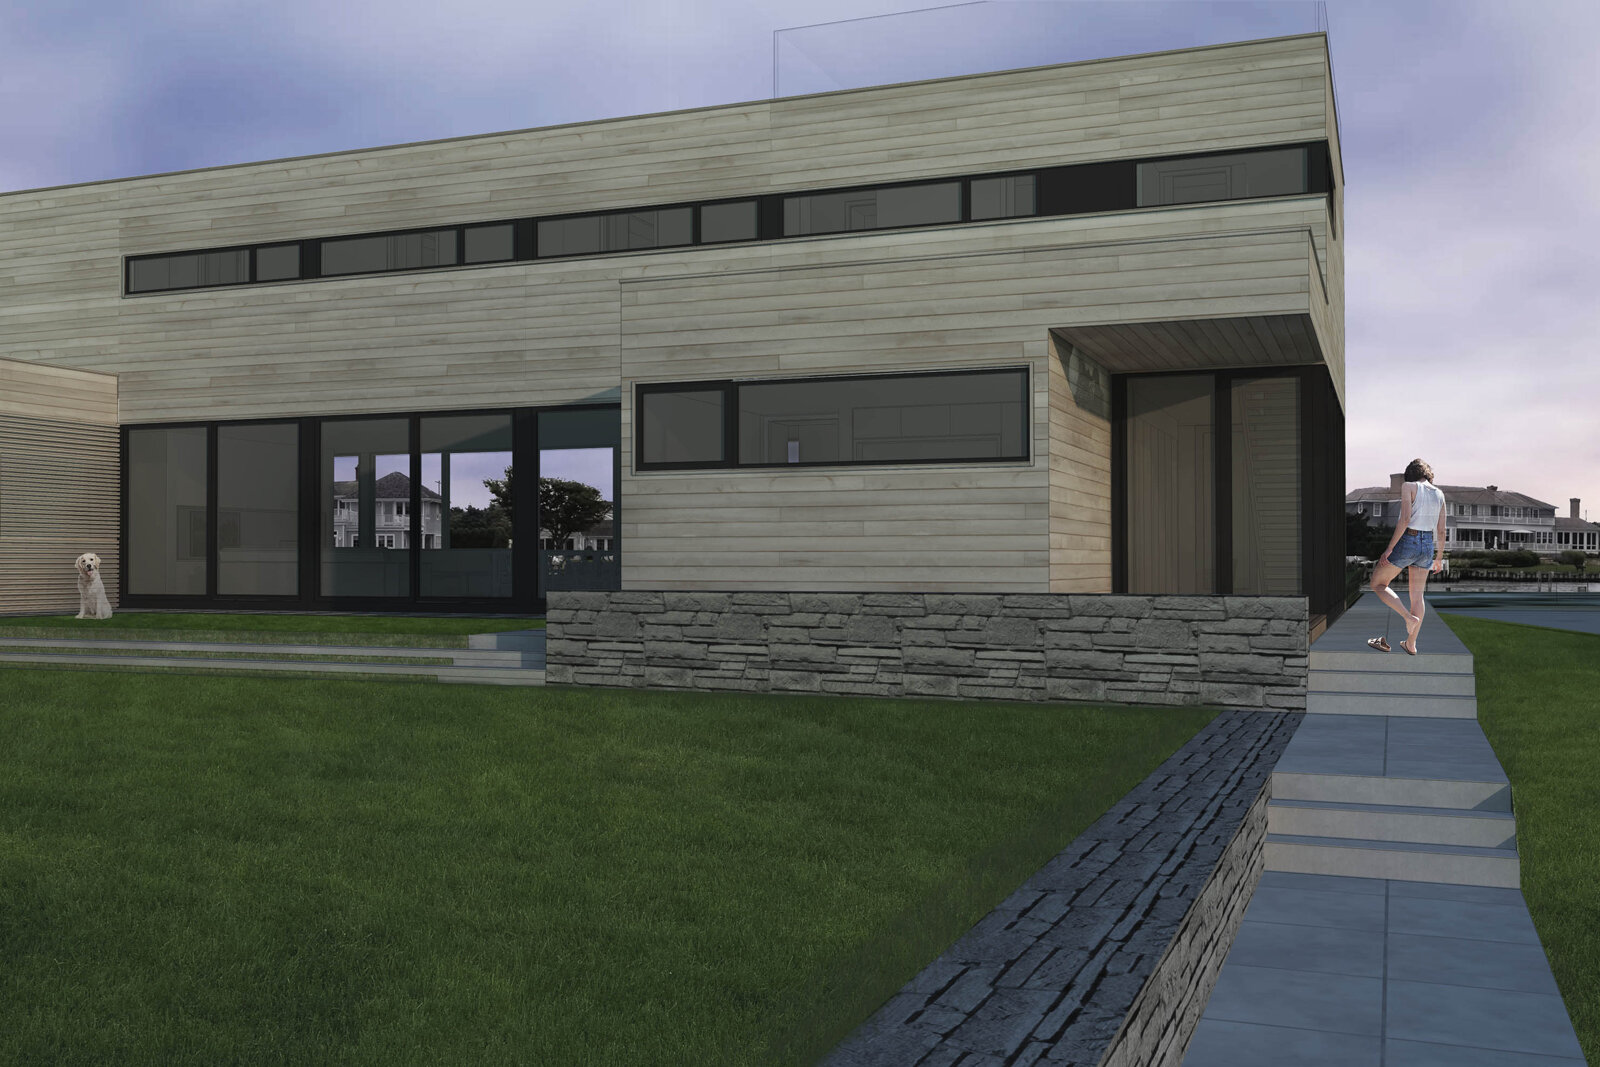 06-res4-resolution-4-architecture-modern-modular-house-prefab-home-quogue-residence-exterior-rendering.jpg